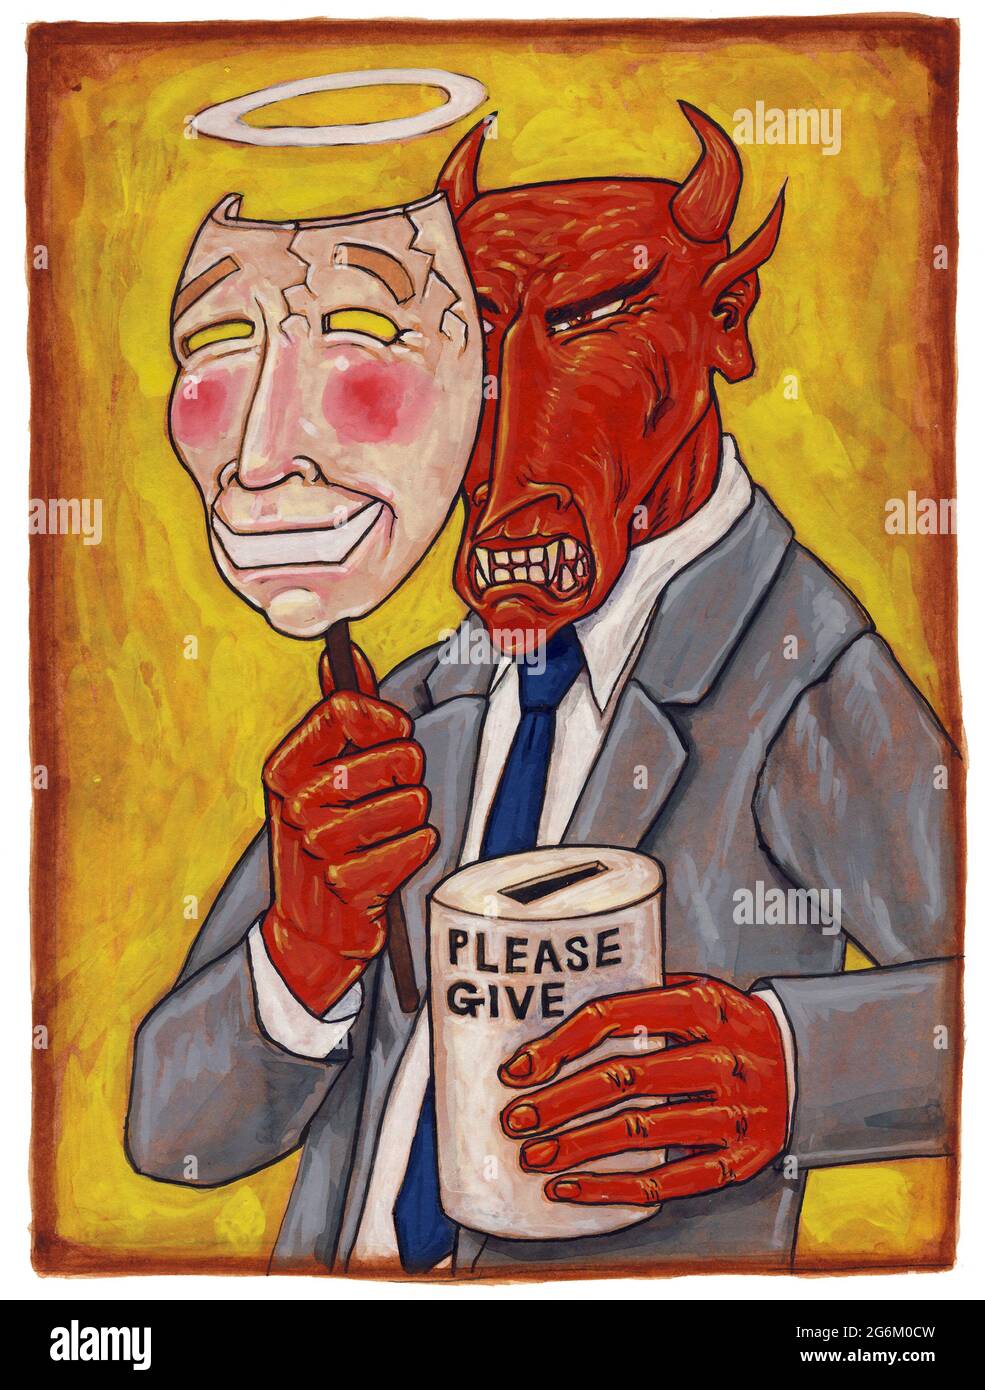 Concept art illustration devil with charity collecting tin hiding behind a saint mask reflecting scam charities, charity fraud, charity abuse of trust Stock Photo